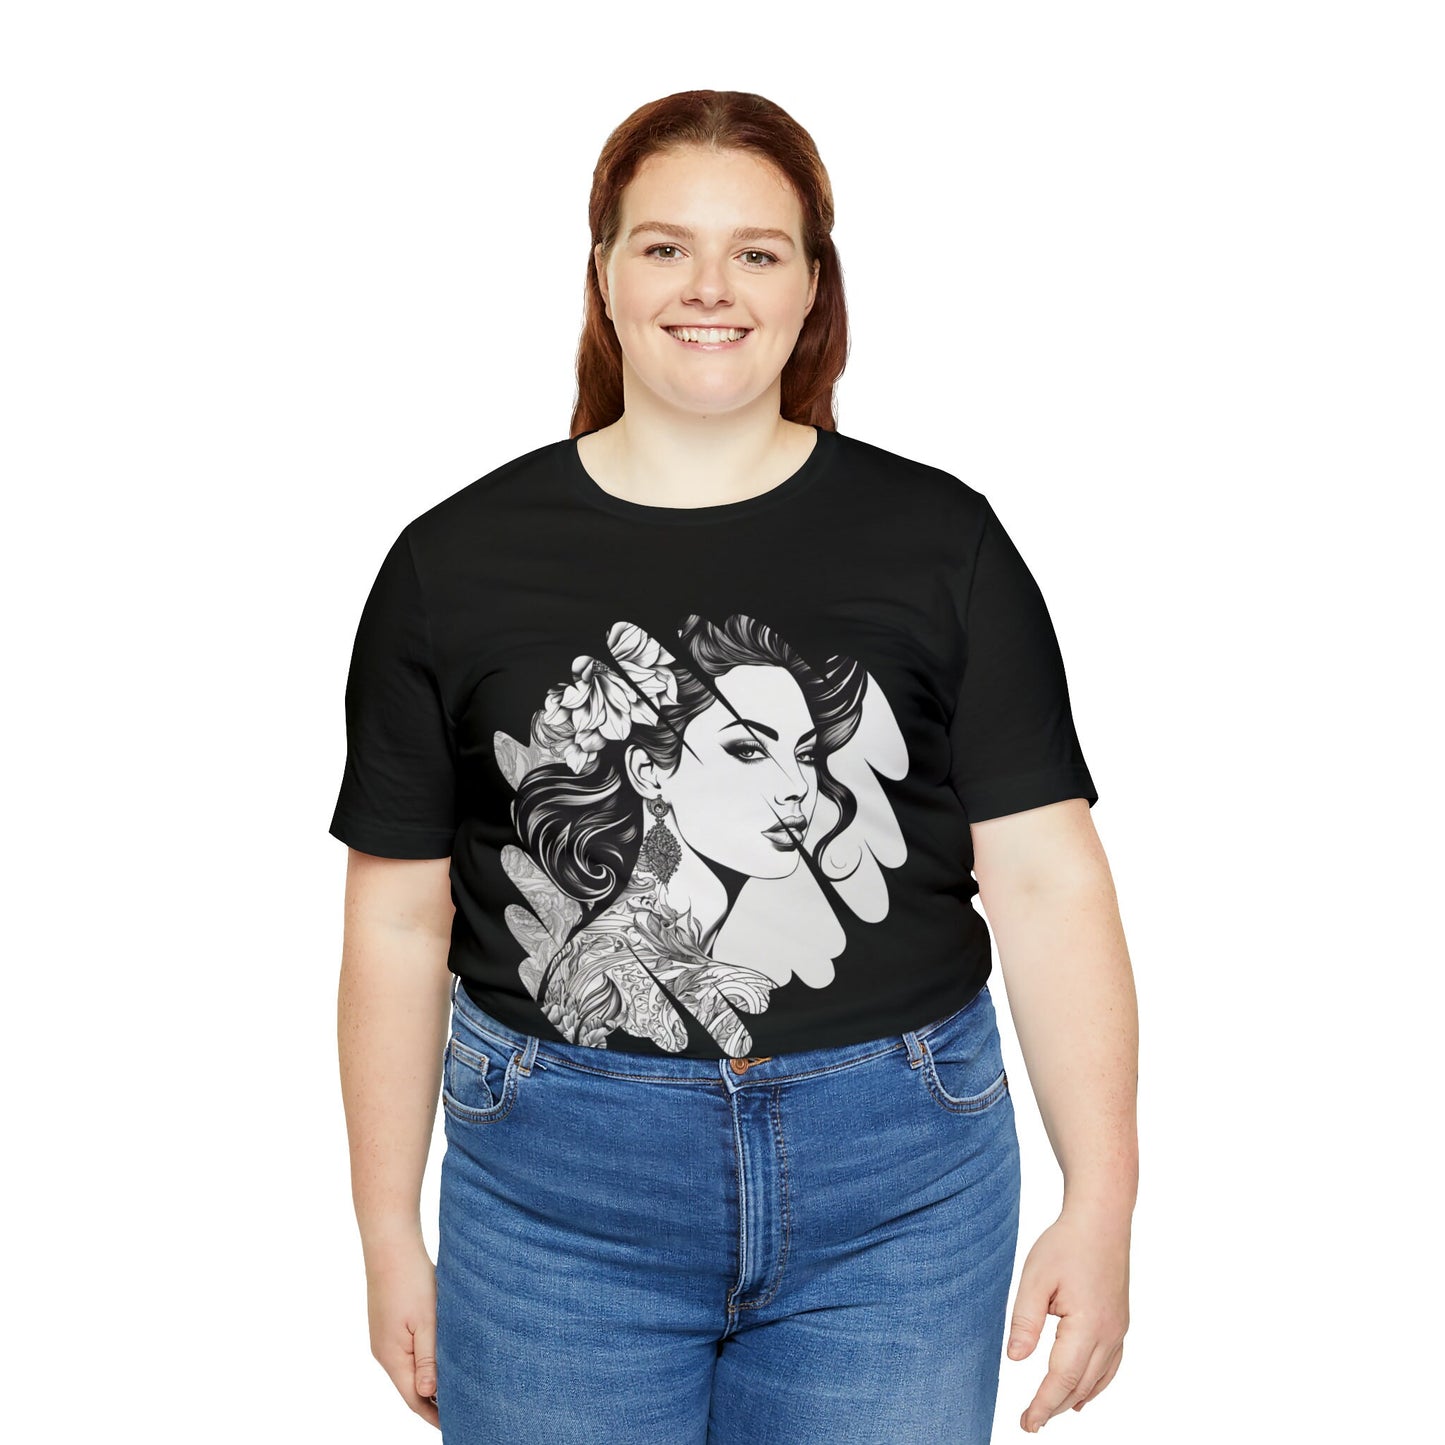 Solana Pin-Up Girl Short Sleeve Tee Perfect Gift for Men and Women